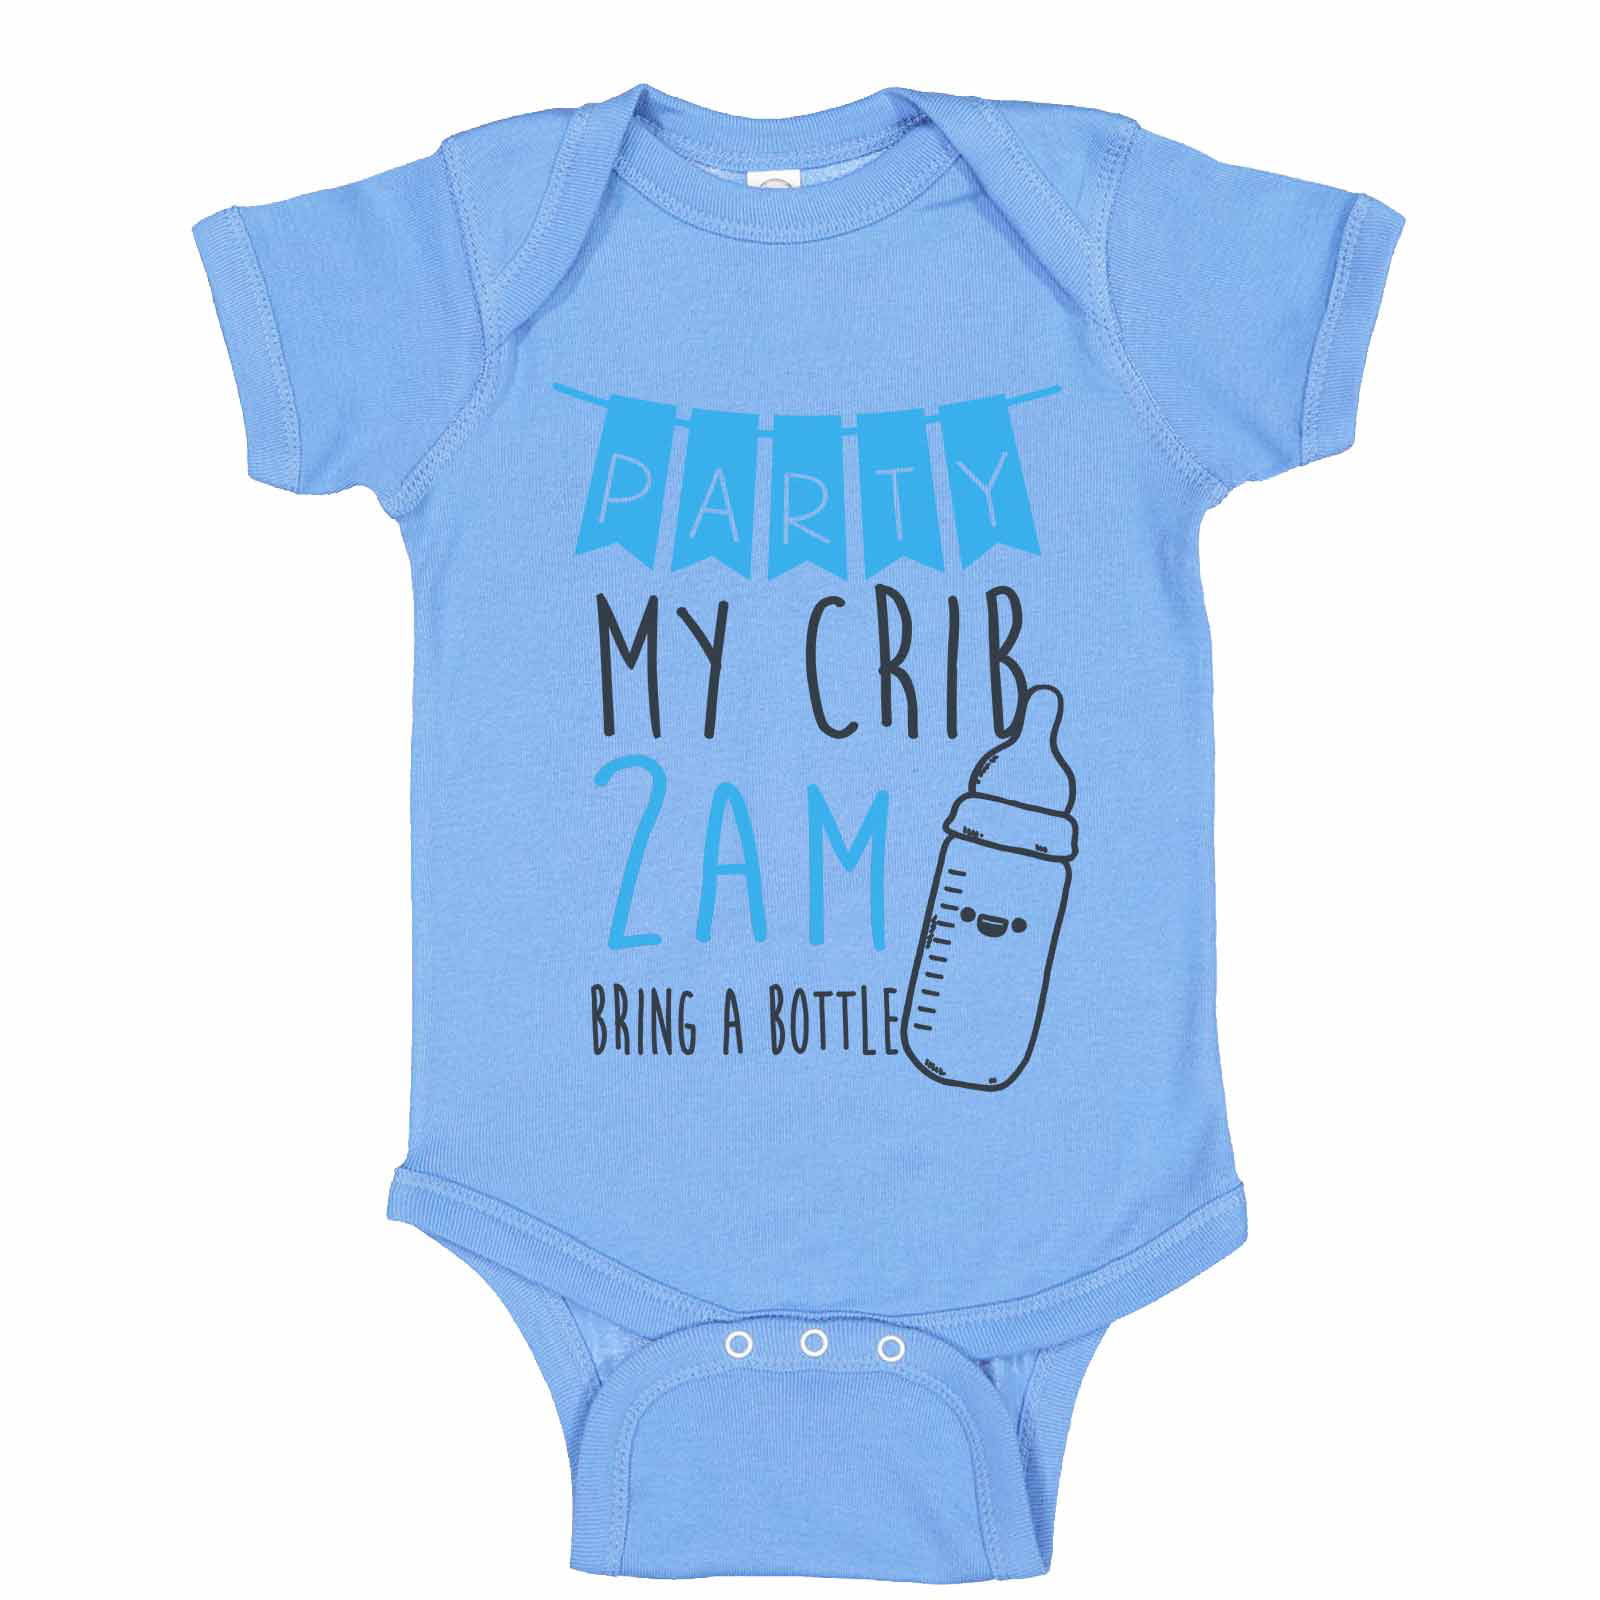 Funny Baby Clothes "Party My Crib 2am Bring a Bottle" Long Sleeve T-Shirt Top 